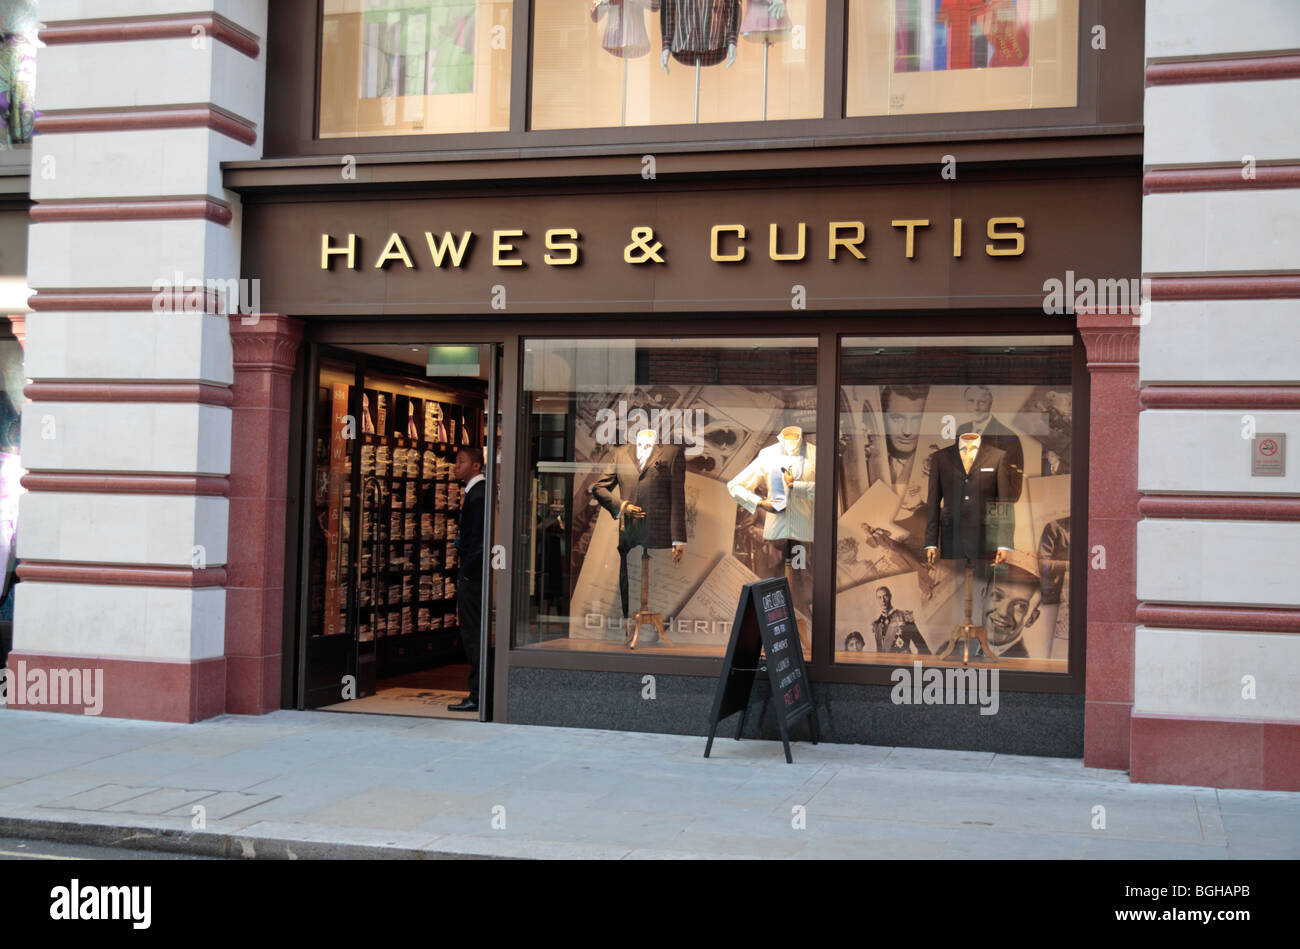 The shop front and entrance to the Hawes & Curtis men's clothing shop on Jermyn Street,  London, UK. Nov 2009 Stock Photo